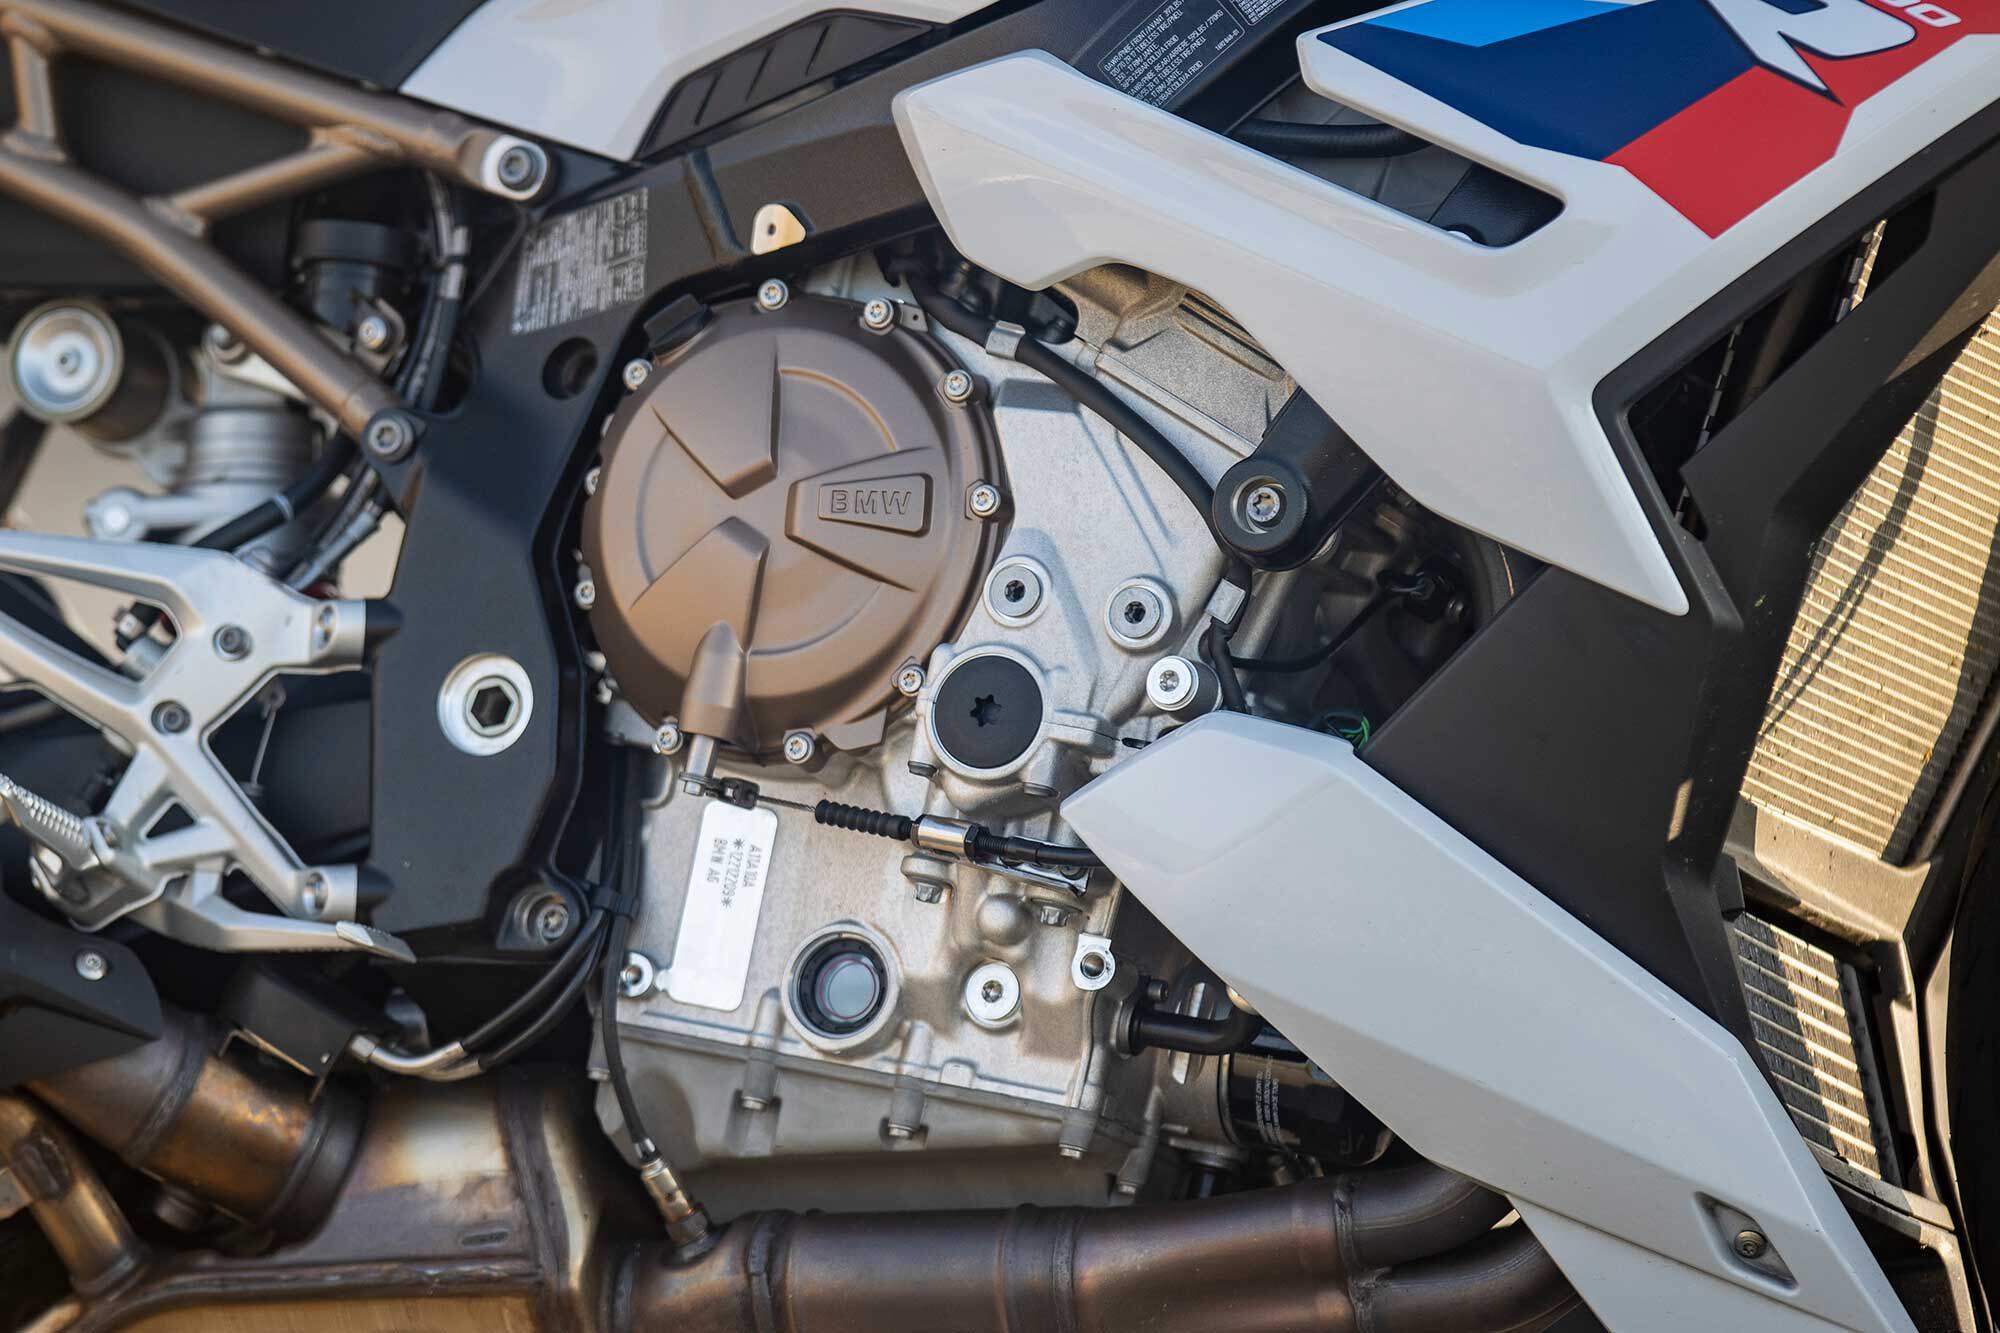 On the <i>CW</i> dyno, the 2022 BMW S 1000 R produced 155.7 hp from its 999cc inline-four.